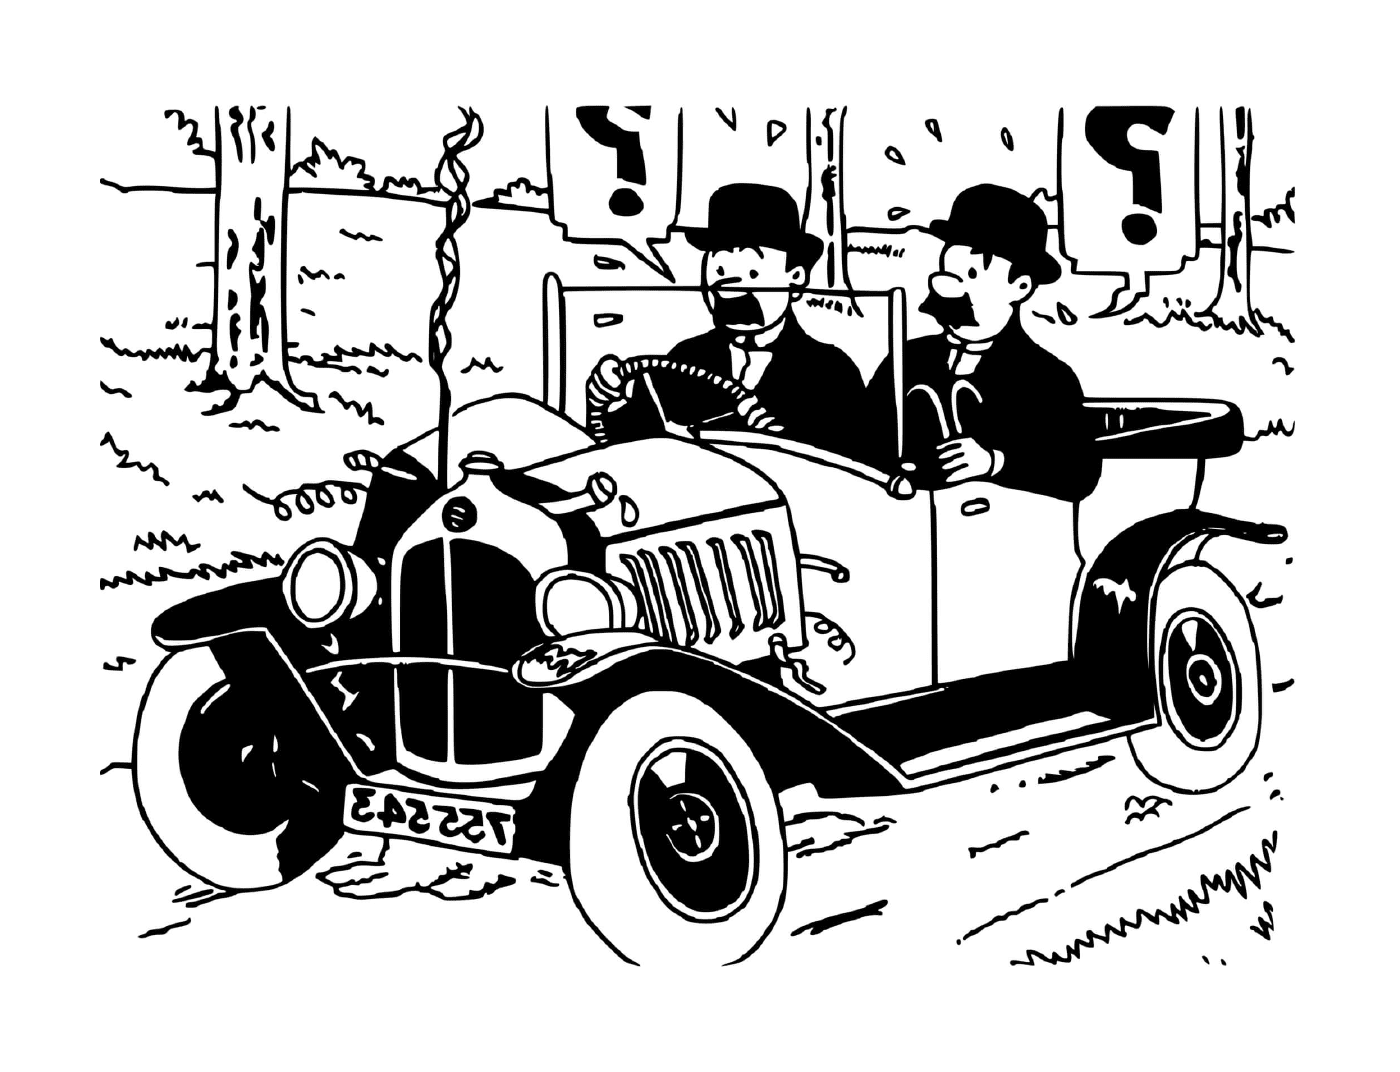  The Dupont brothers by car 